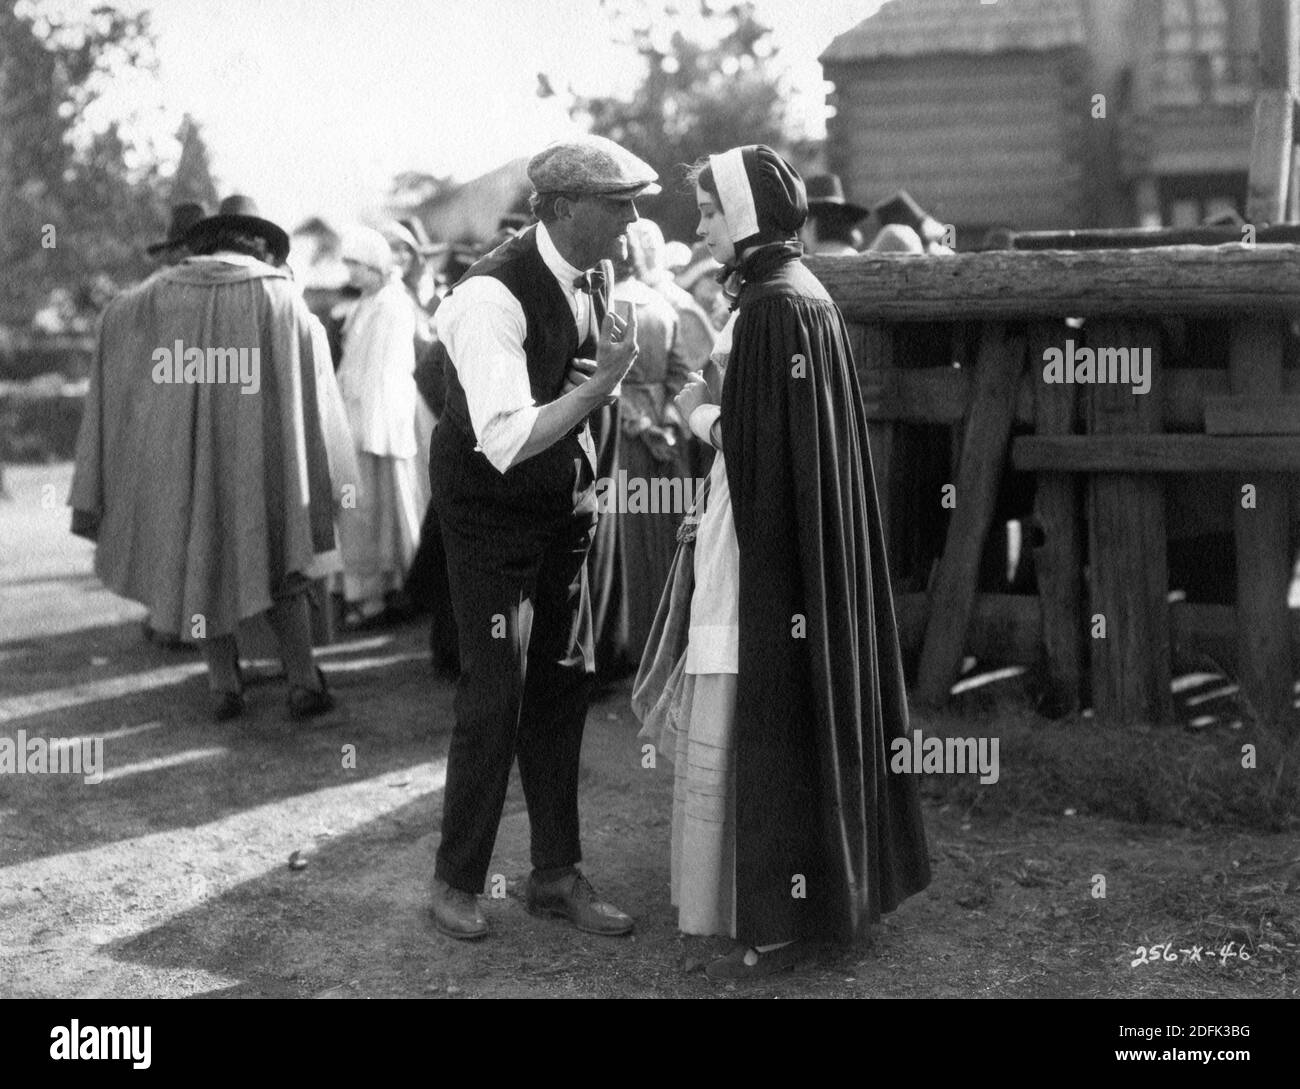 Director VICTOR SEASTROM and LILLIAN GISH as Hester Prynne on set candid during filming of THE SCARLET LETTER 1925 director VICTOR SEASTROM / SJOSTROM novel Nathaniel Hawthorne adaptation and titles Frances Marion costume design Max Rée Metro Goldwyn Mayer Stock Photo